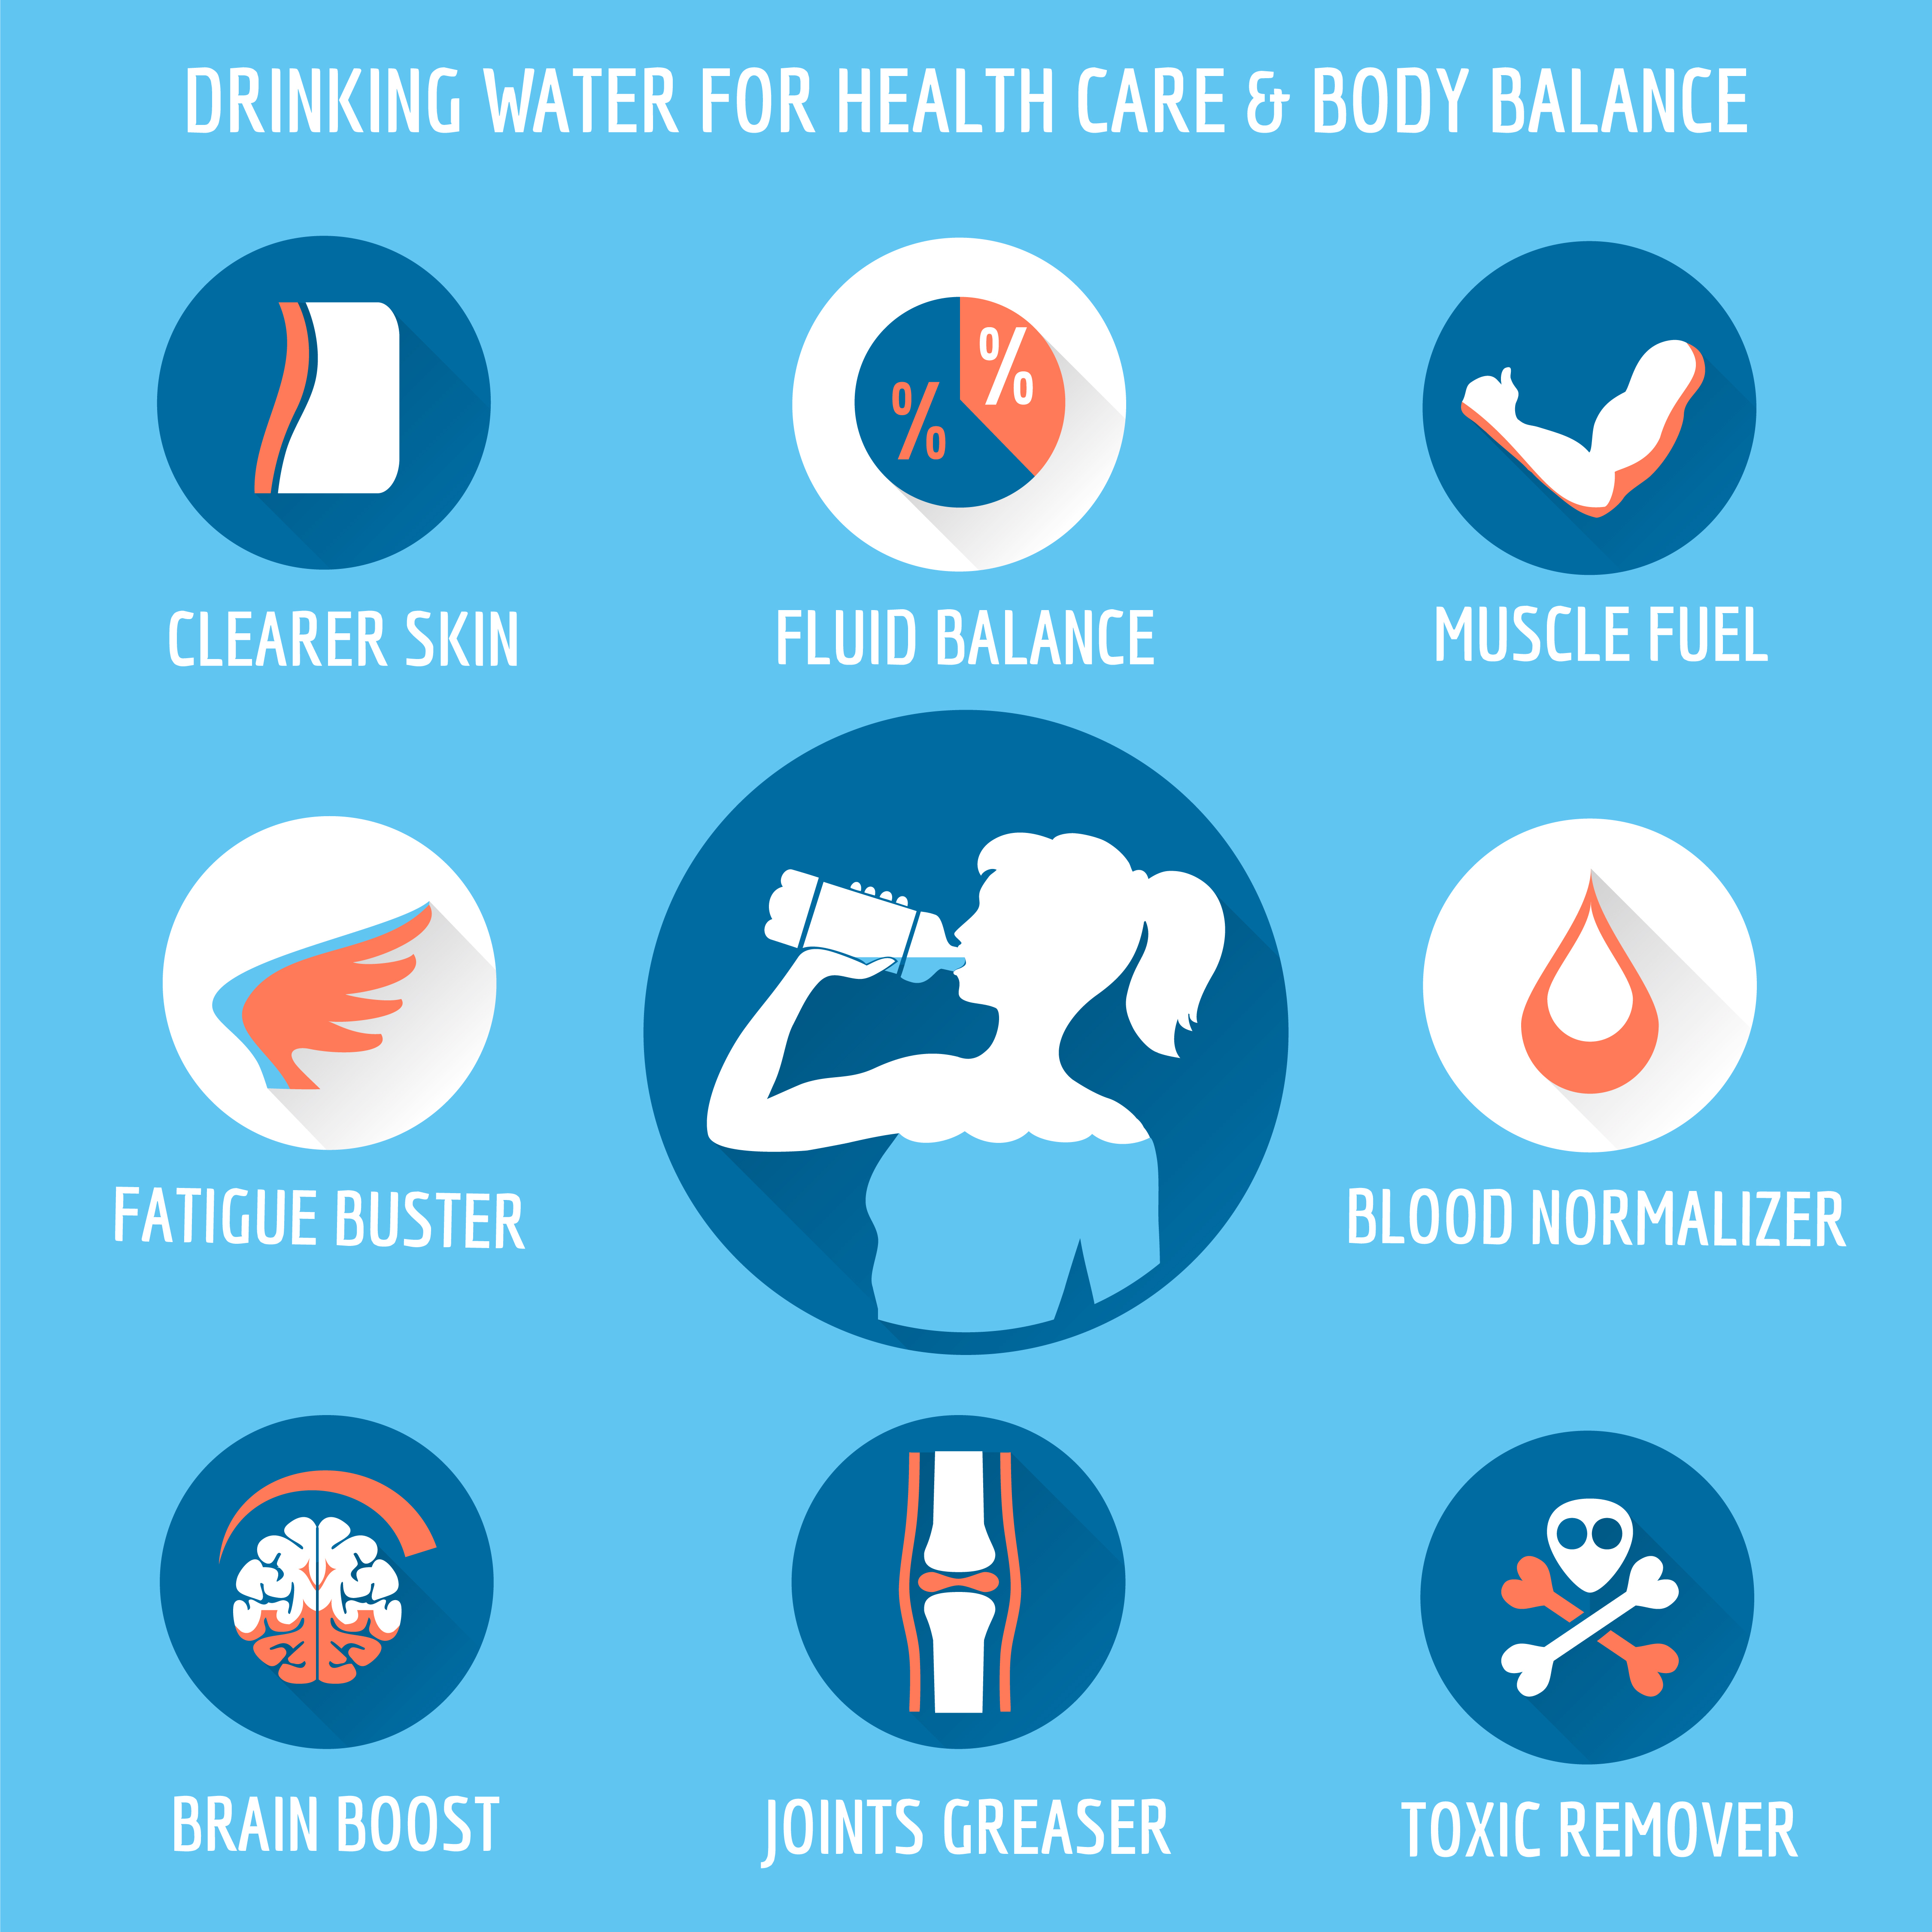 Water is the most important fluid of your body, which should be drank as much as possible!